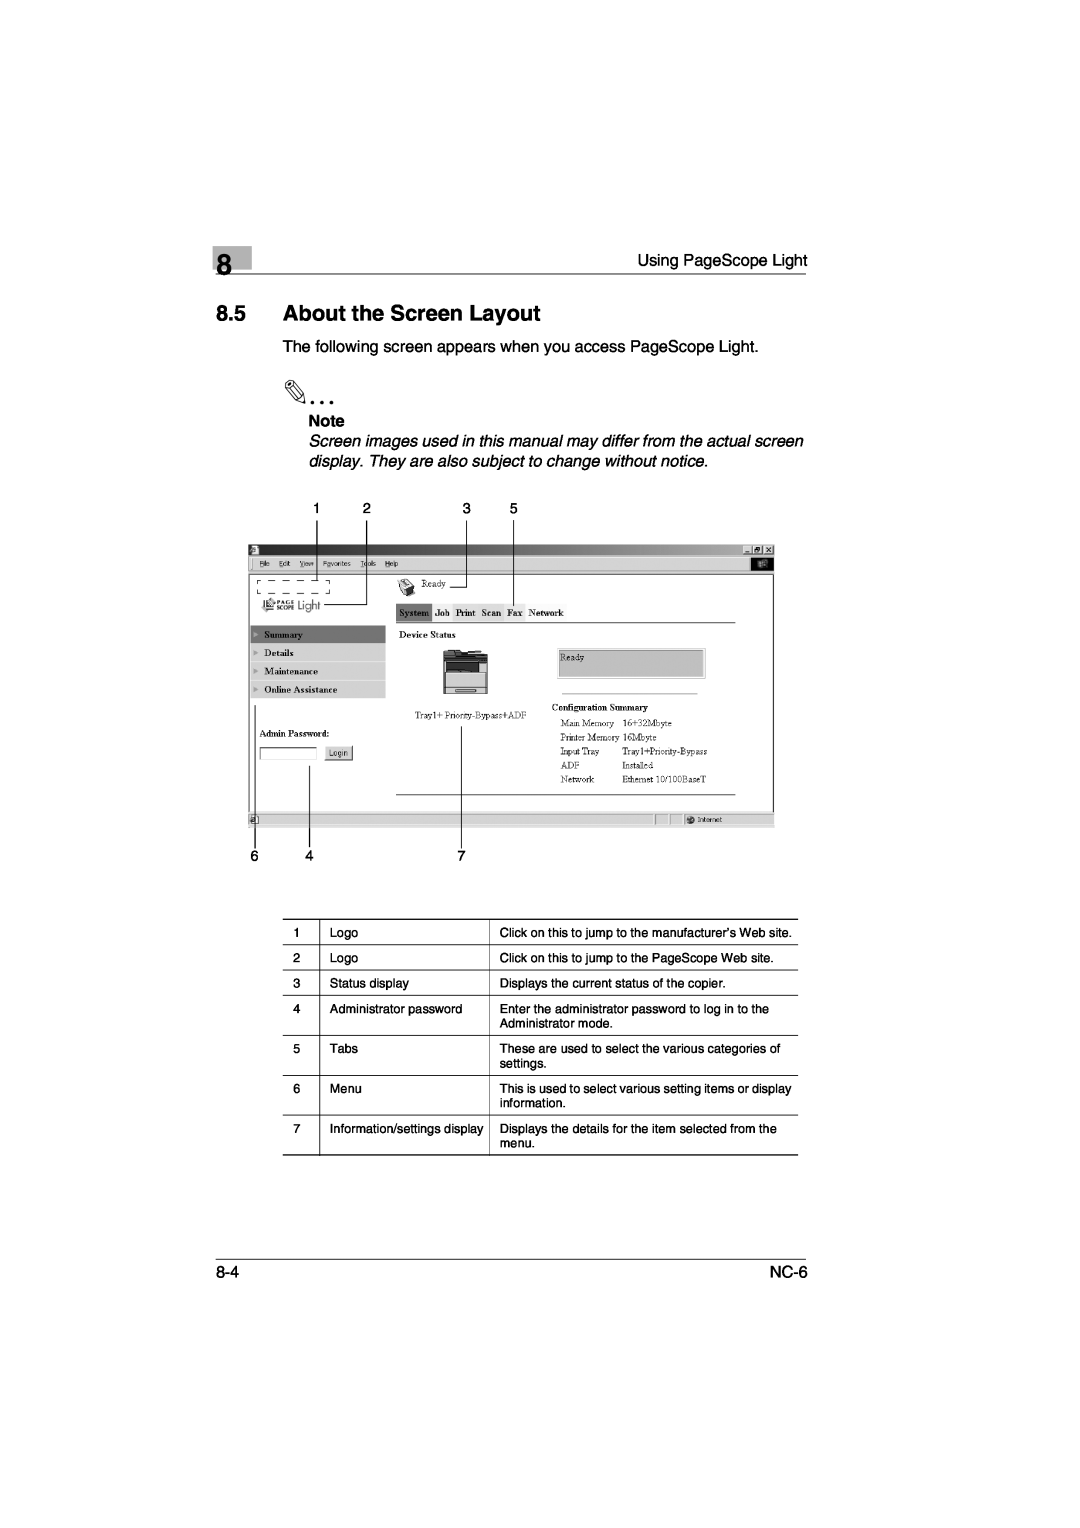 Konica Minolta NC-6 user manual About the Screen Layout, Click on this to jump to the manufacturer’s Web site 